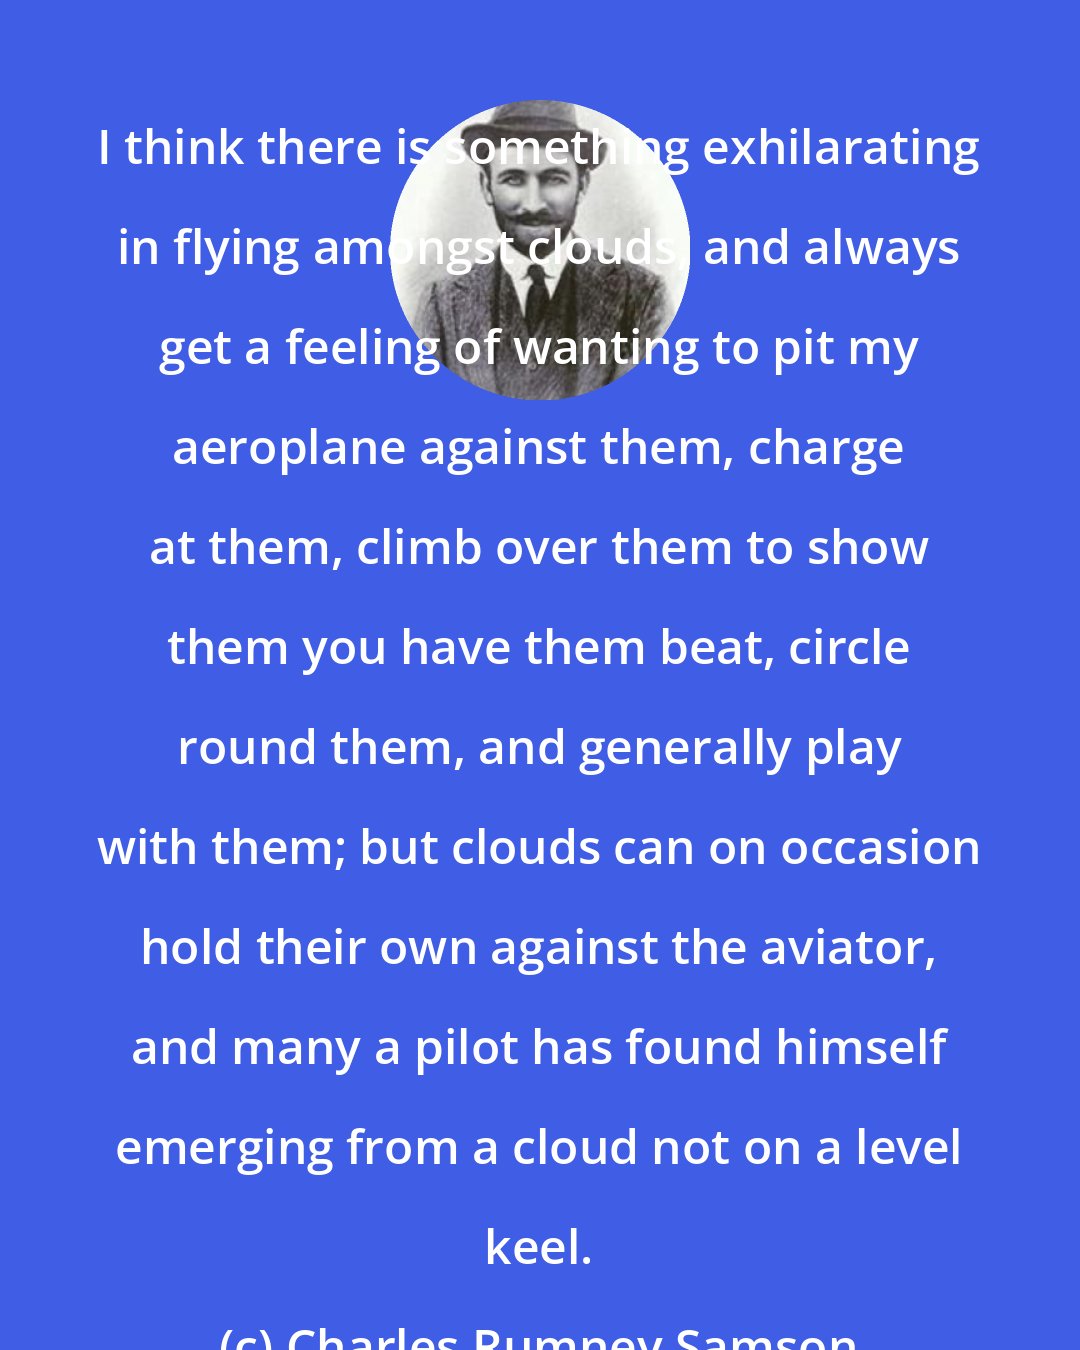 Charles Rumney Samson: I think there is something exhilarating in flying amongst clouds, and always get a feeling of wanting to pit my aeroplane against them, charge at them, climb over them to show them you have them beat, circle round them, and generally play with them; but clouds can on occasion hold their own against the aviator, and many a pilot has found himself emerging from a cloud not on a level keel.